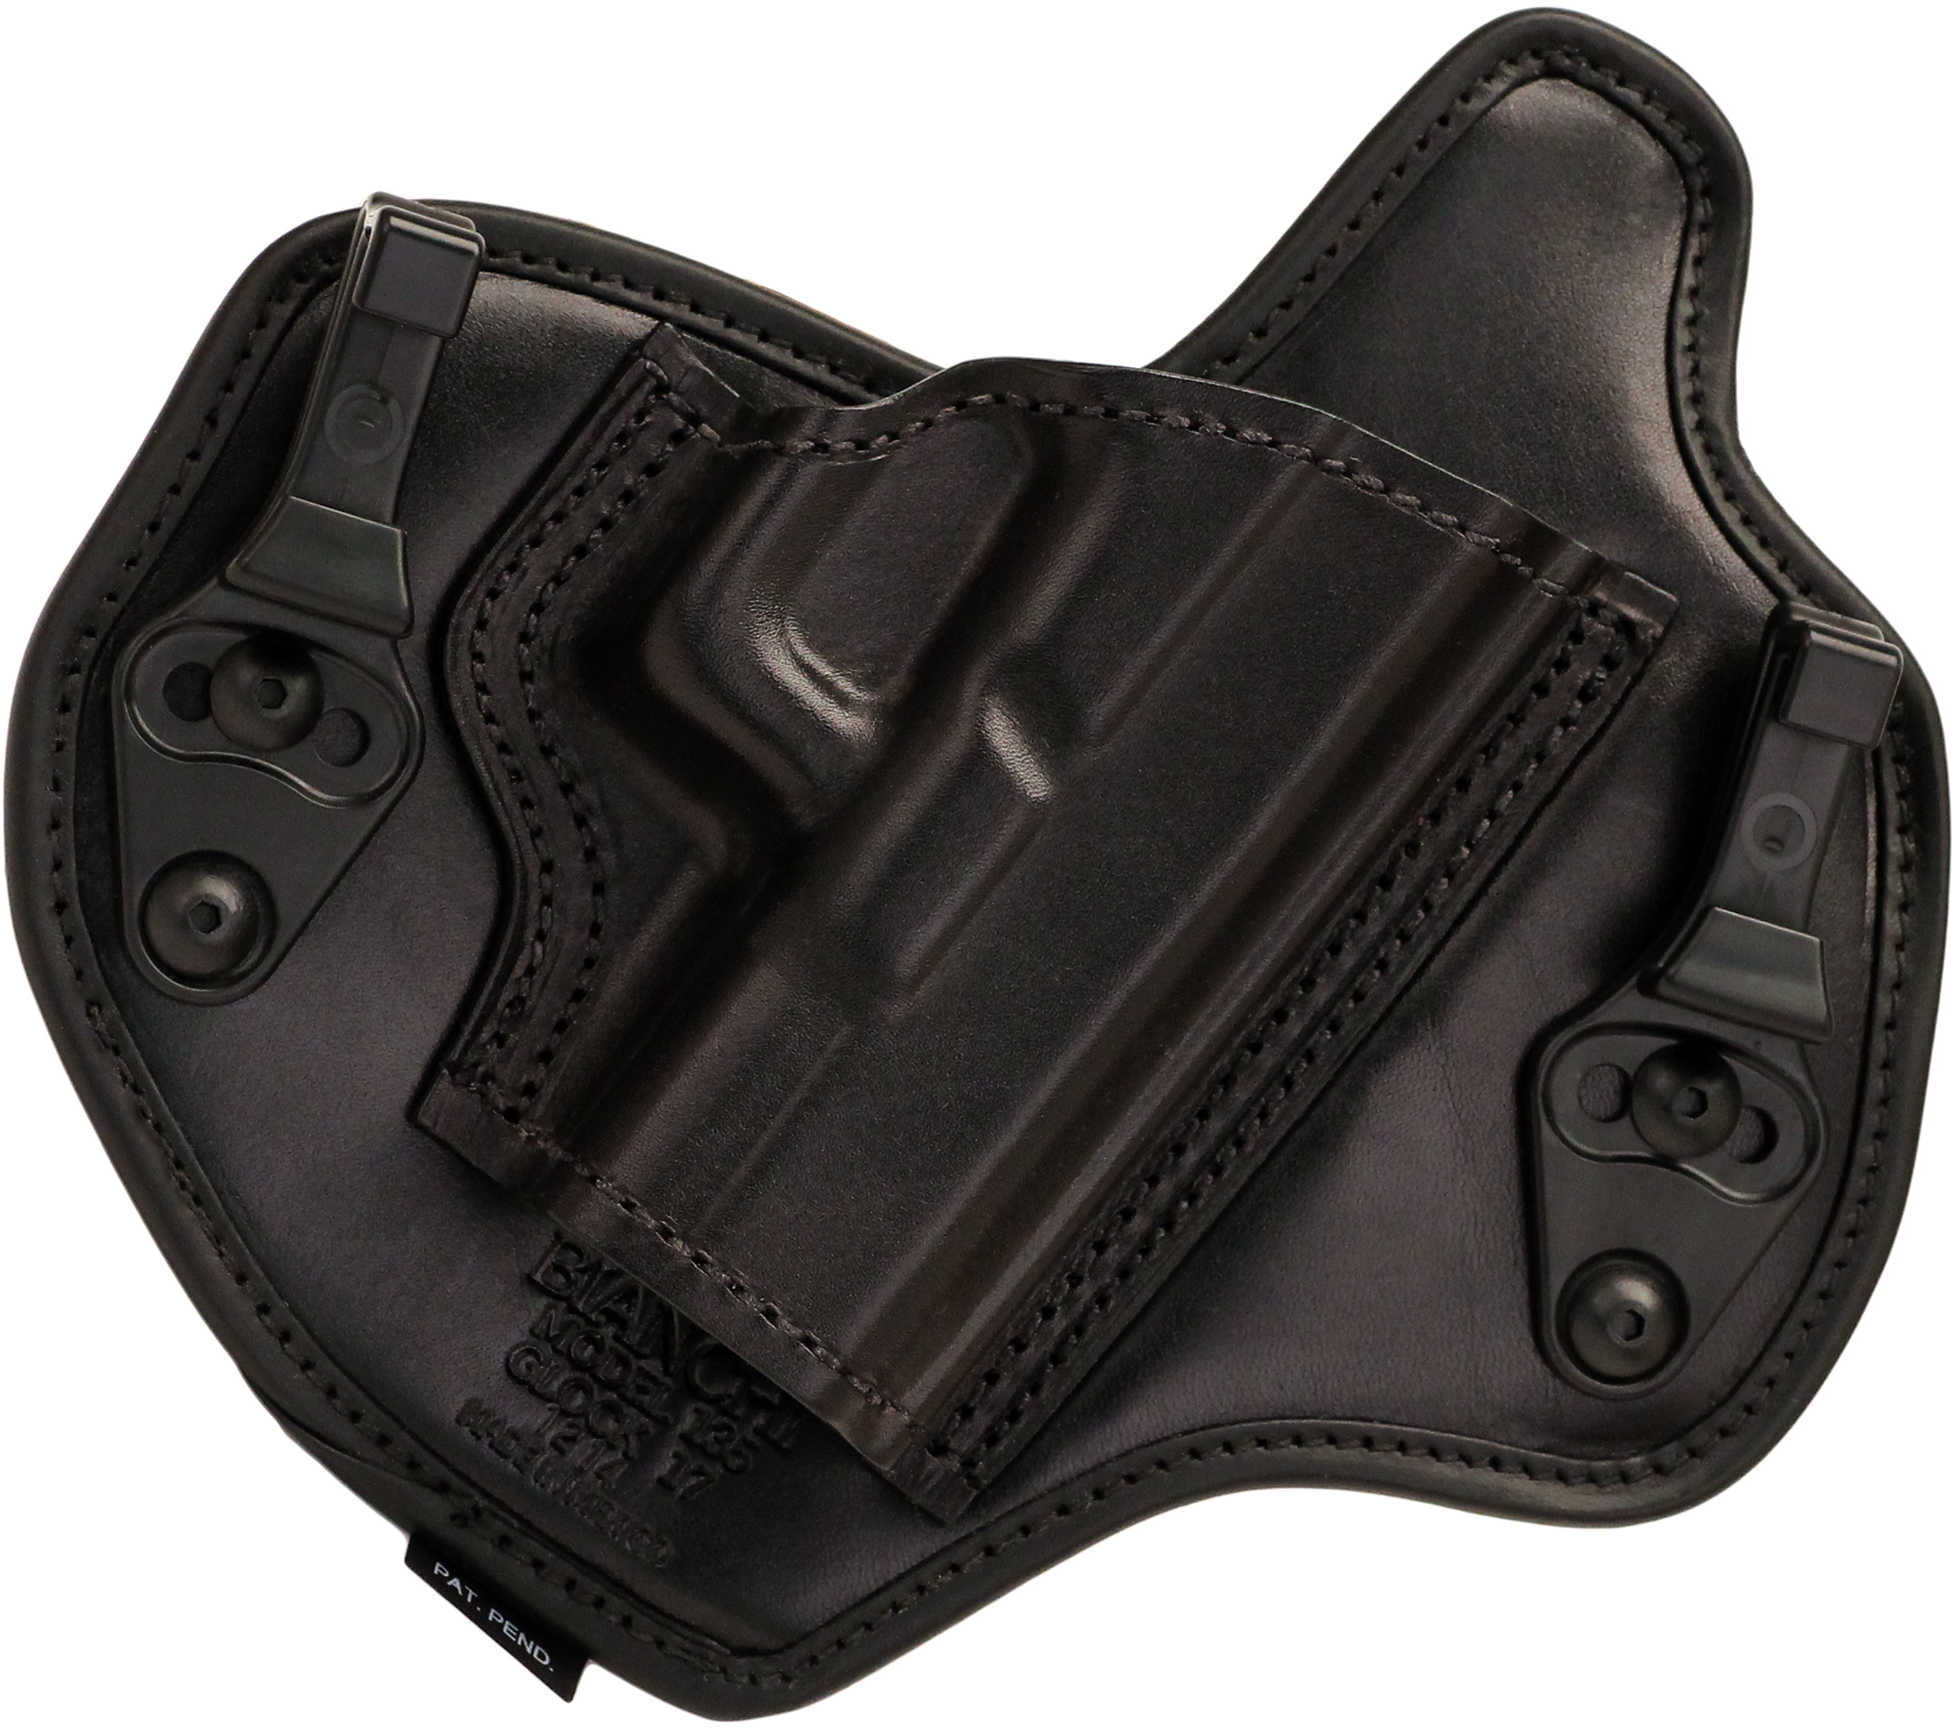 Bianchi Model #135 Suppression Inside the Pant Holster Fits Glock 17 19 22 23 26 27 31 32 33 Right Hand Black 25744